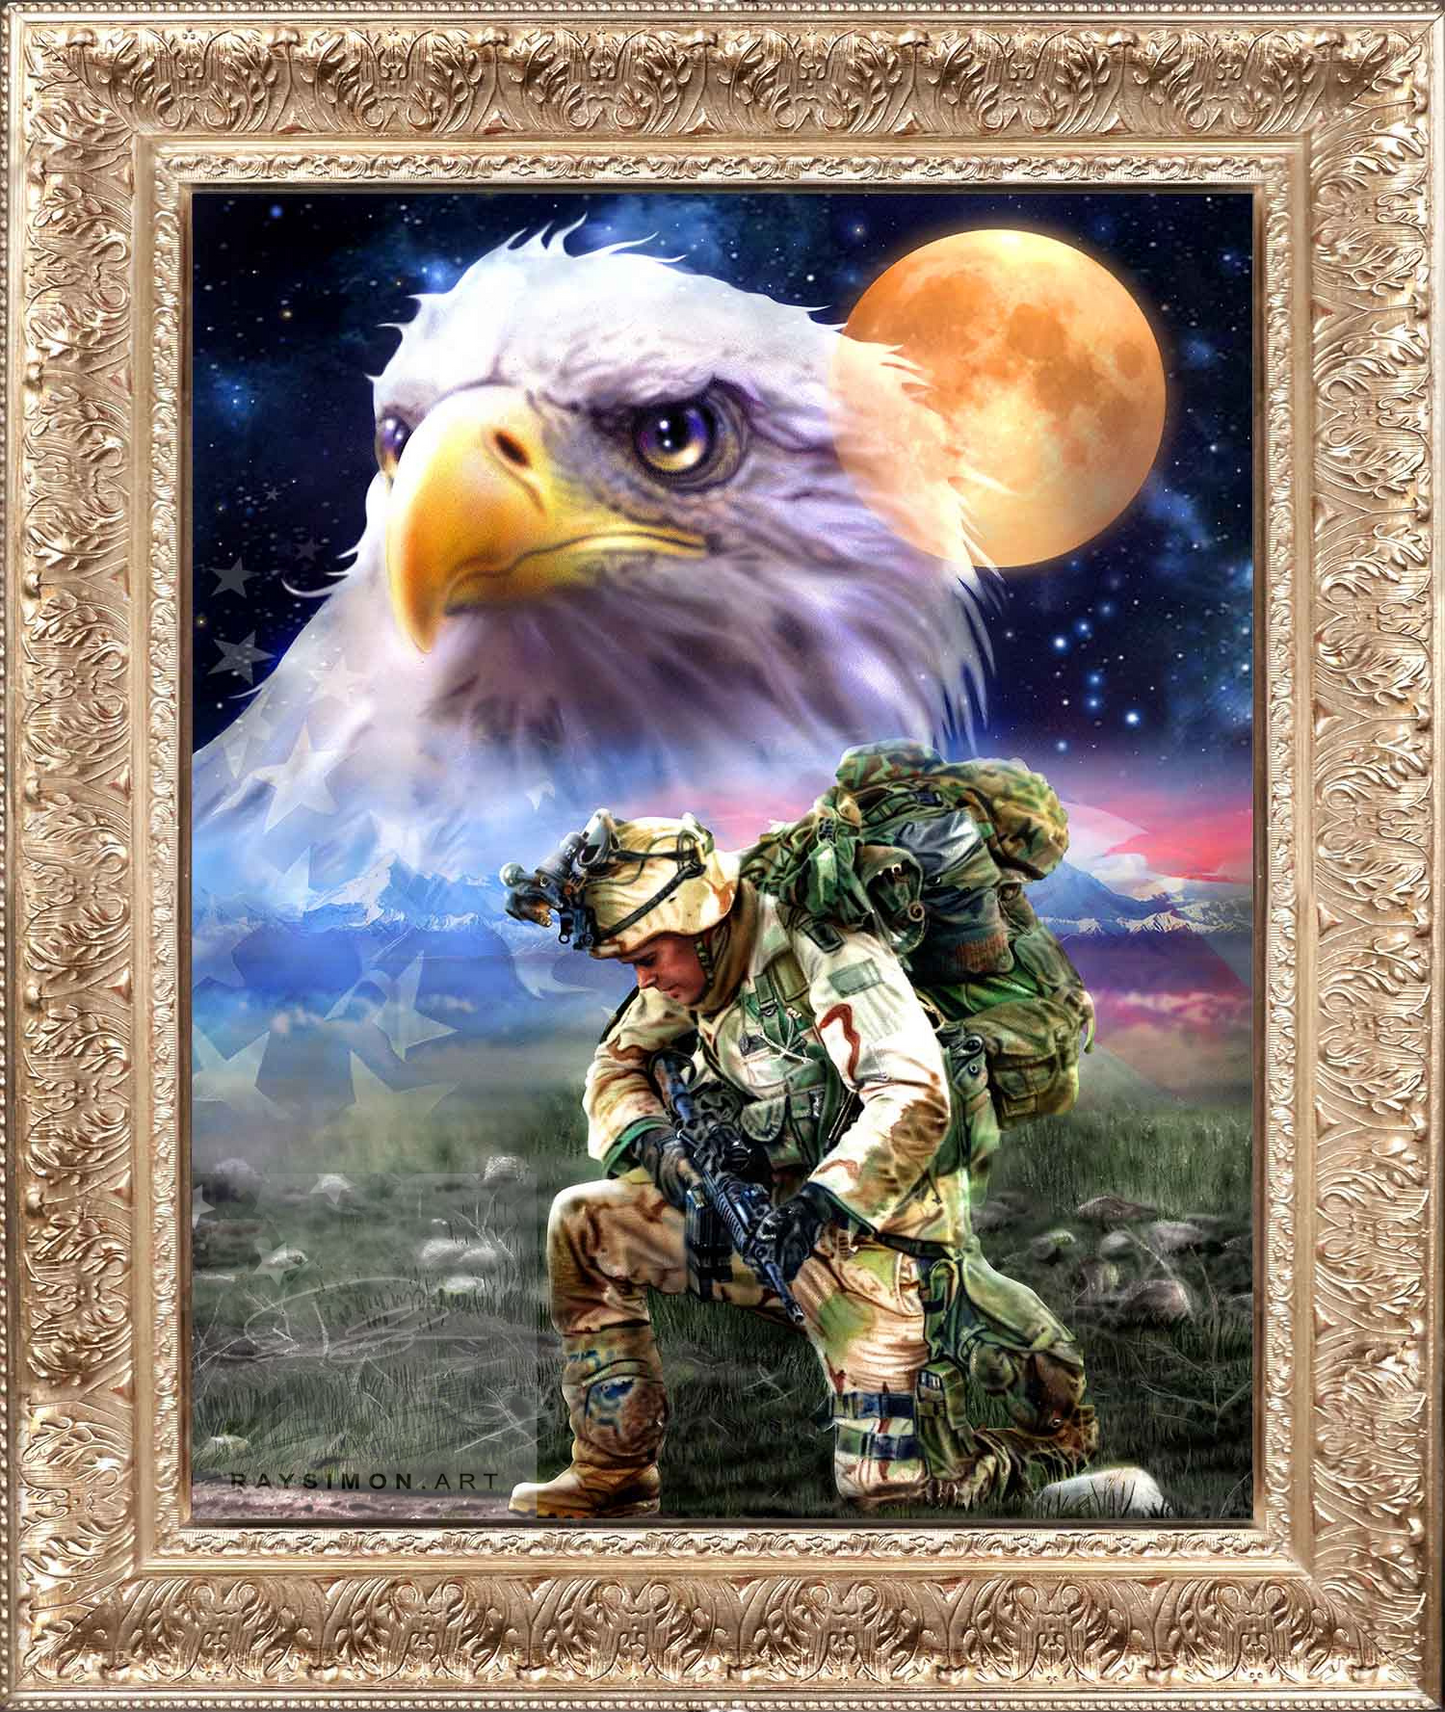 Army Artwork - 'Soldier's Creed'